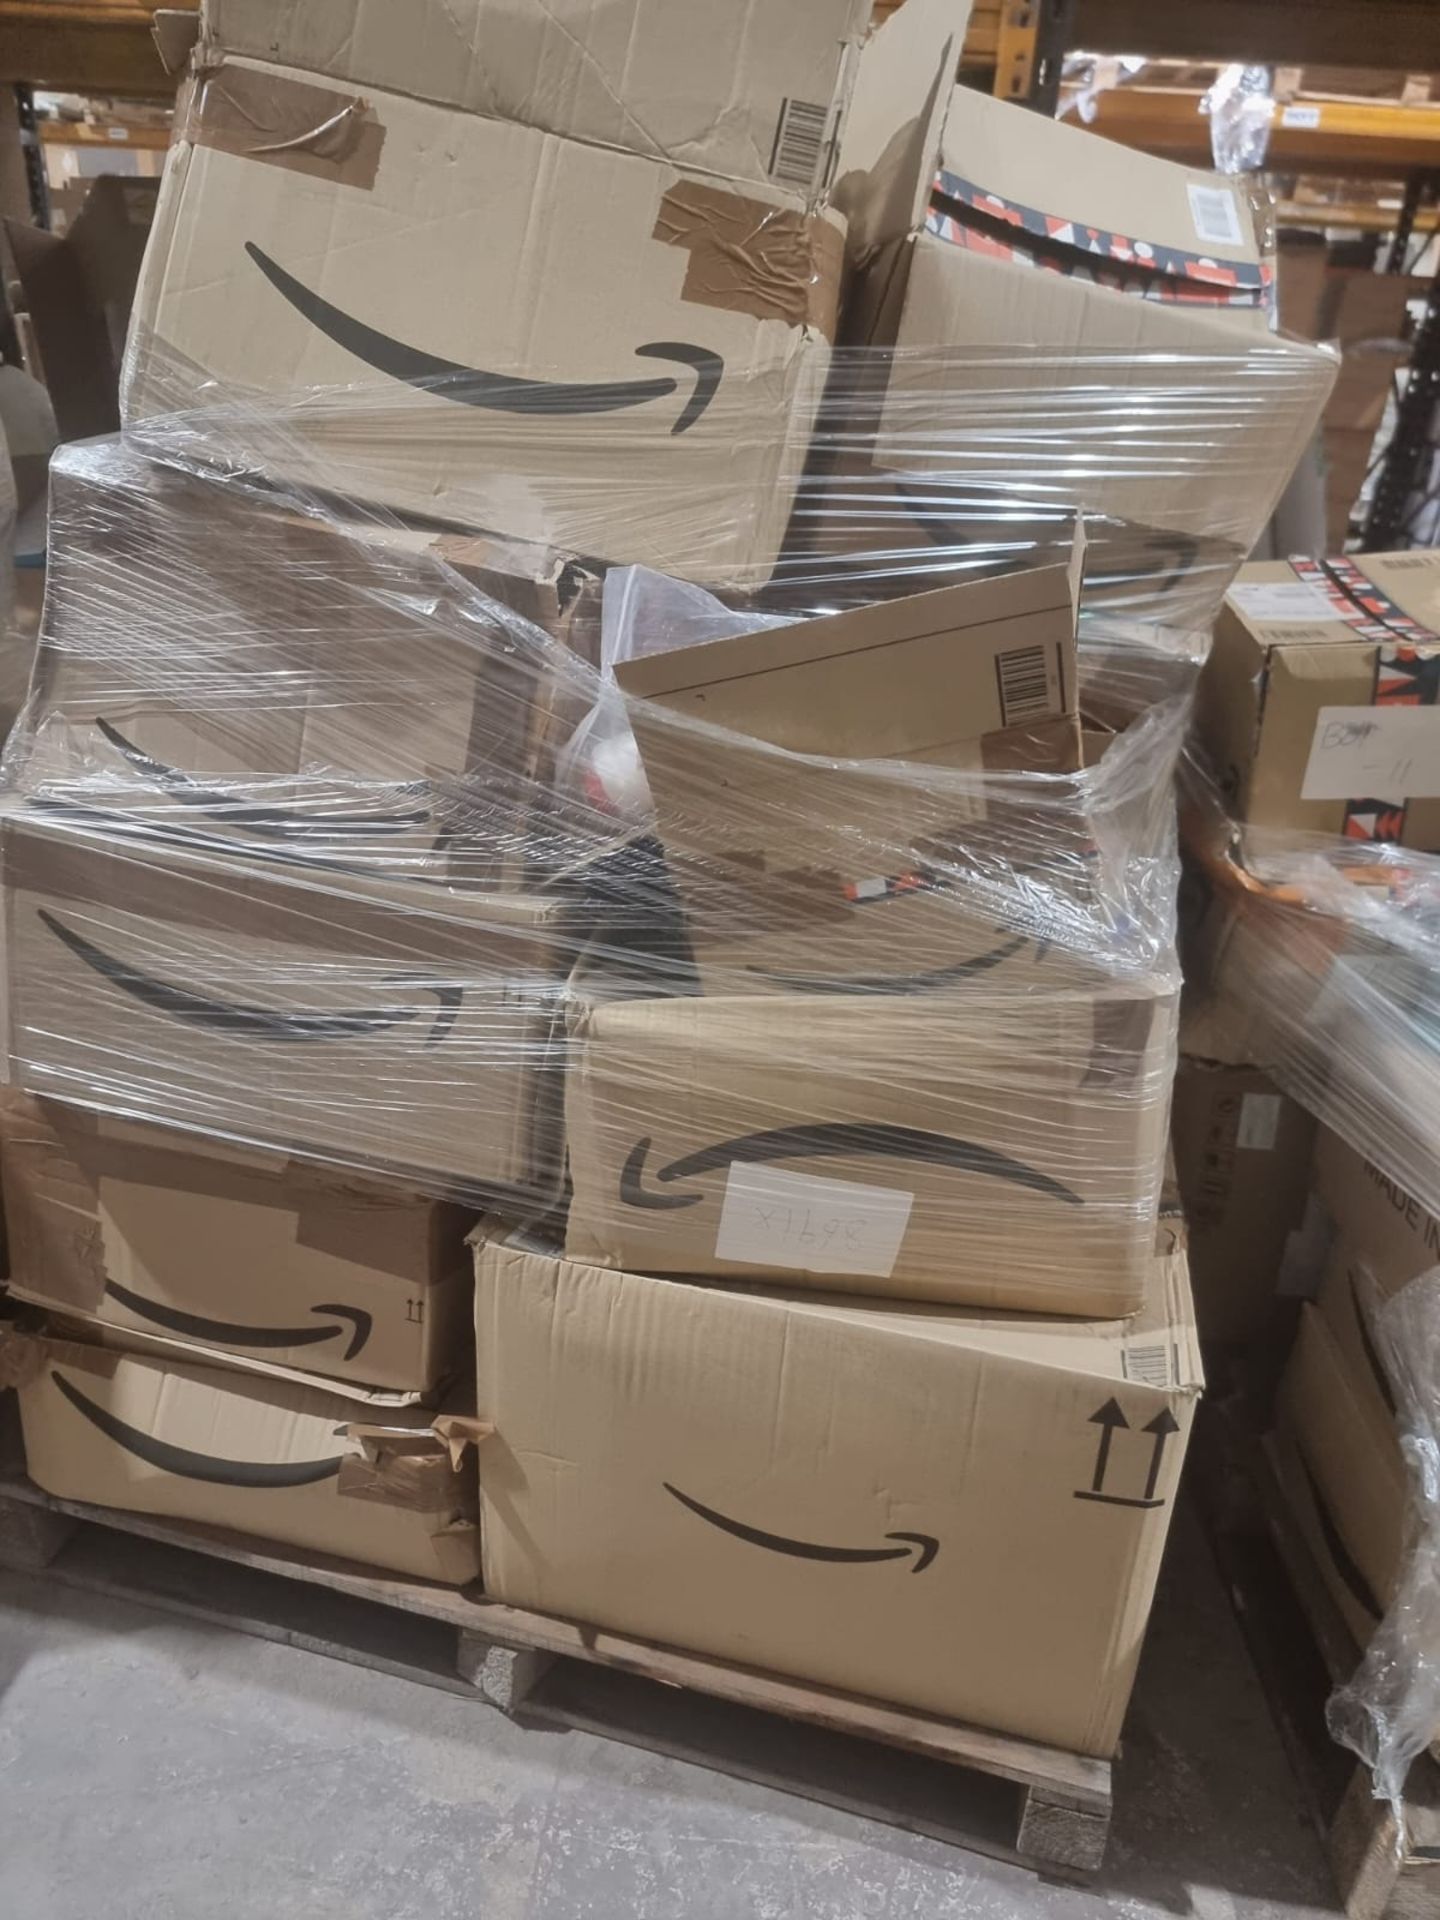 TRADE LOT TO CONTAIN 100 x MIXED BRAND NEW AMAZON OVERSTOCK ITEMS. ITEMS ARE PICKED RANDOMLY FROM - Image 18 of 21